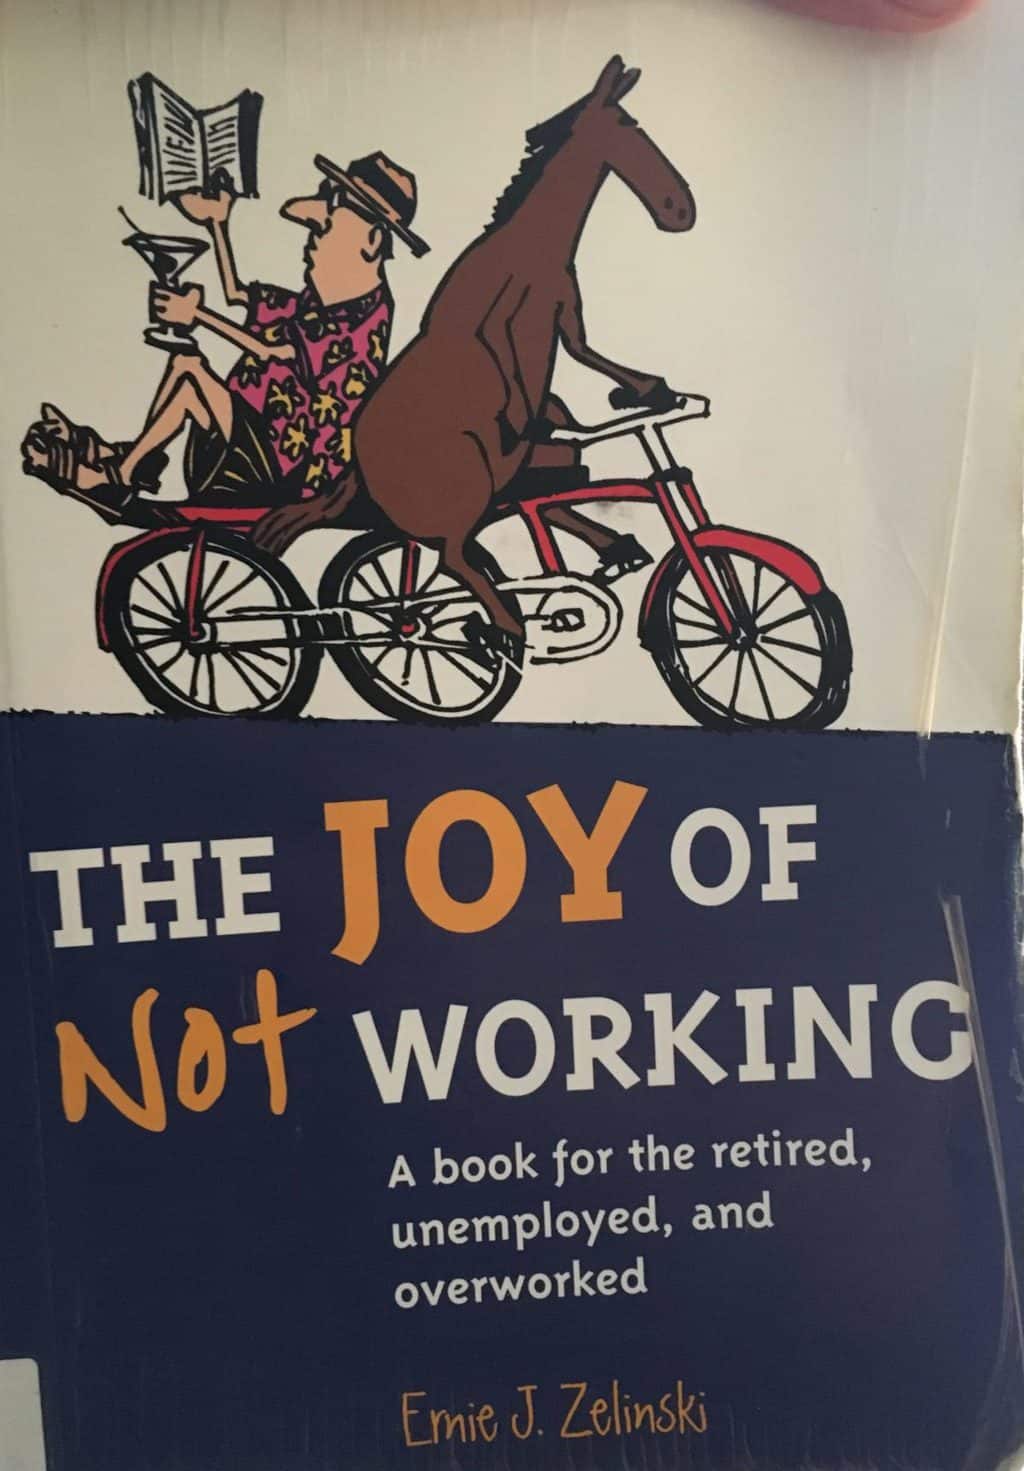 The Joy of Not Working: a book review